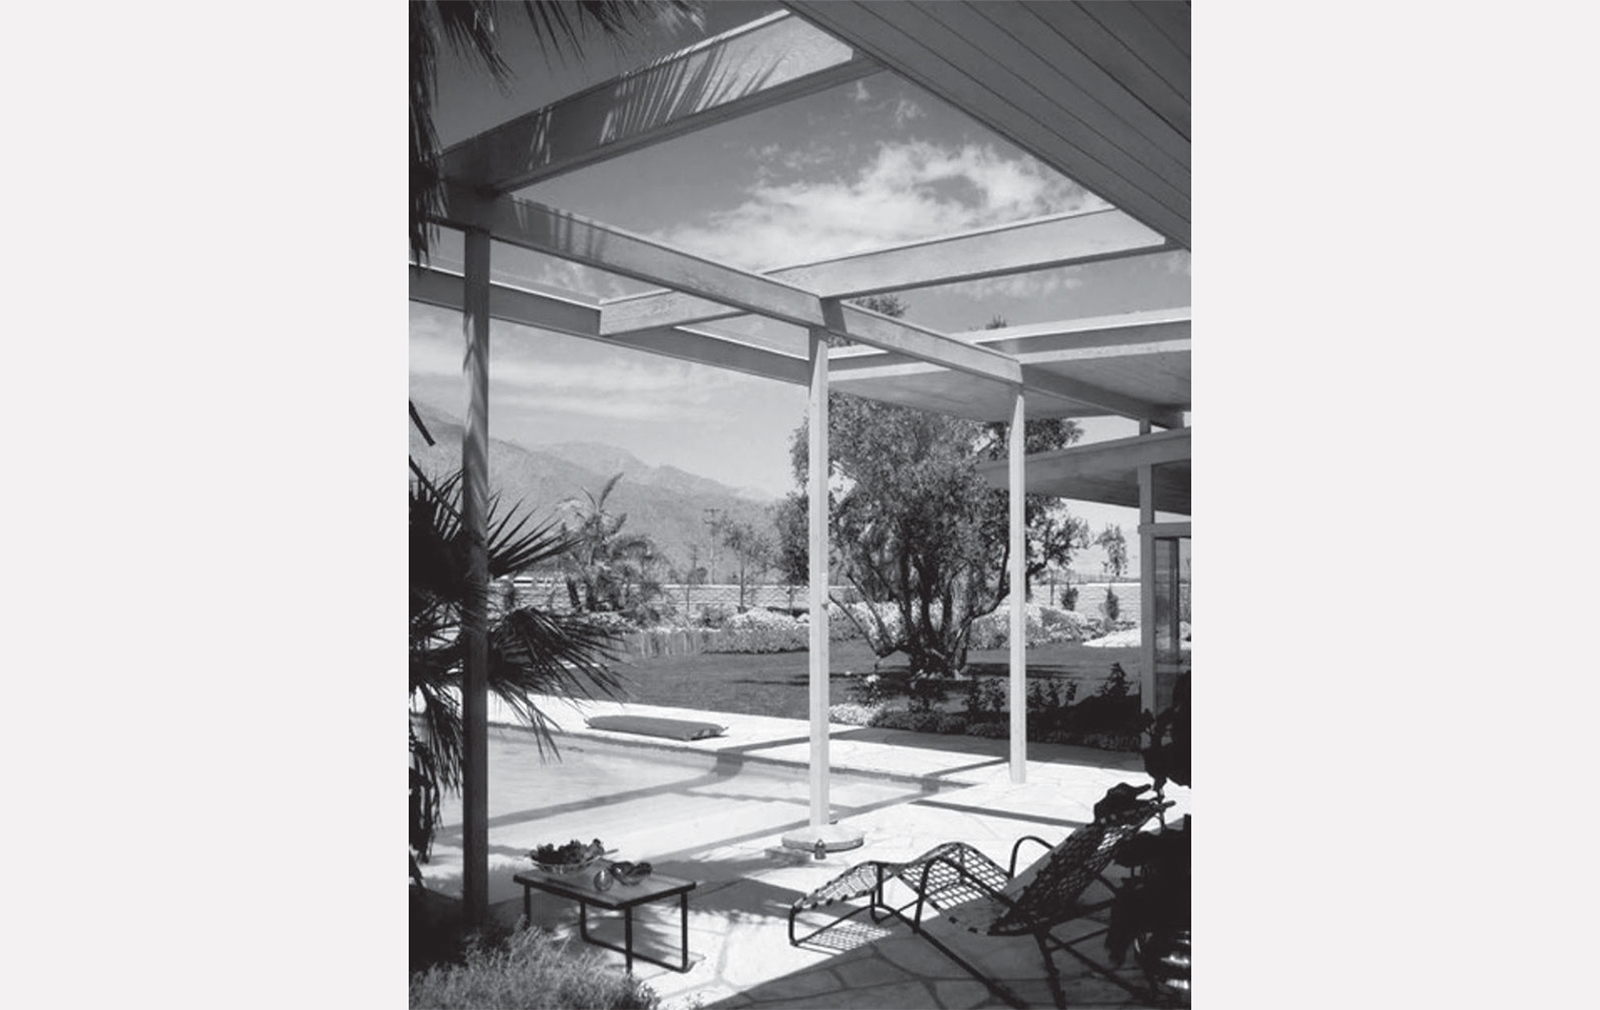 Koerner House by E Stewart Williams in Palm Springs